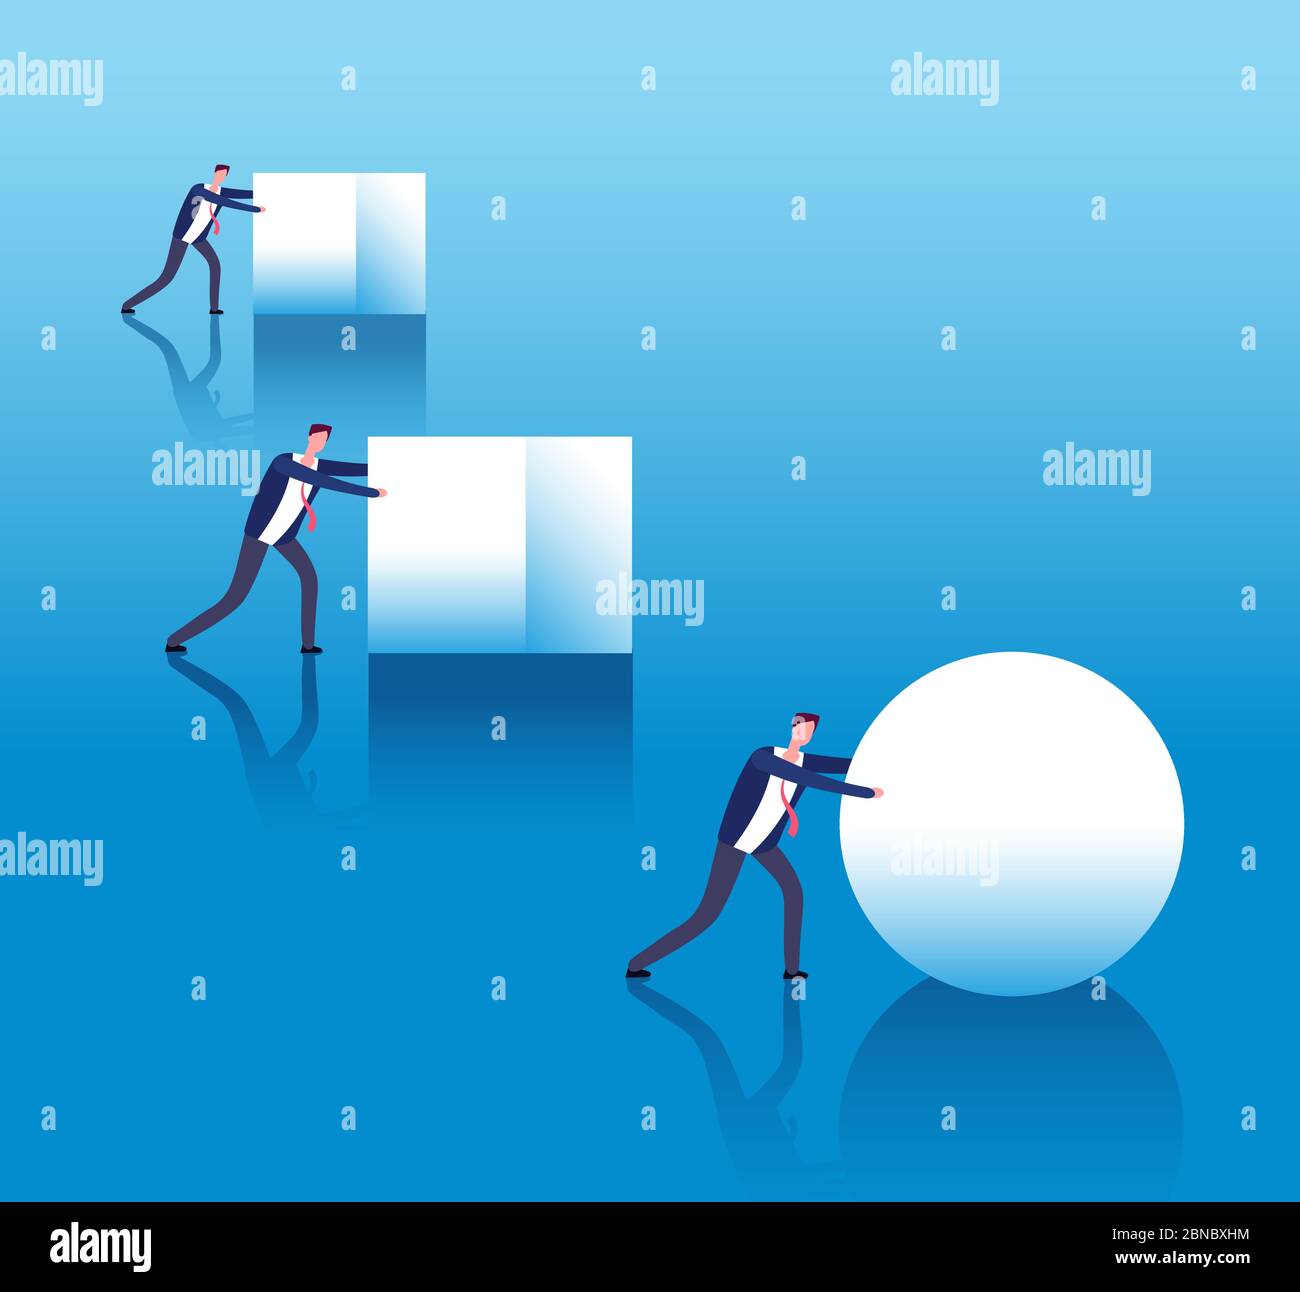 Business efficient concept. Businessmen push boxes and smart leader rolls ball. Business innovation and strategy thinking vector poster. Illustration of efficiency work and performance Stock Vector